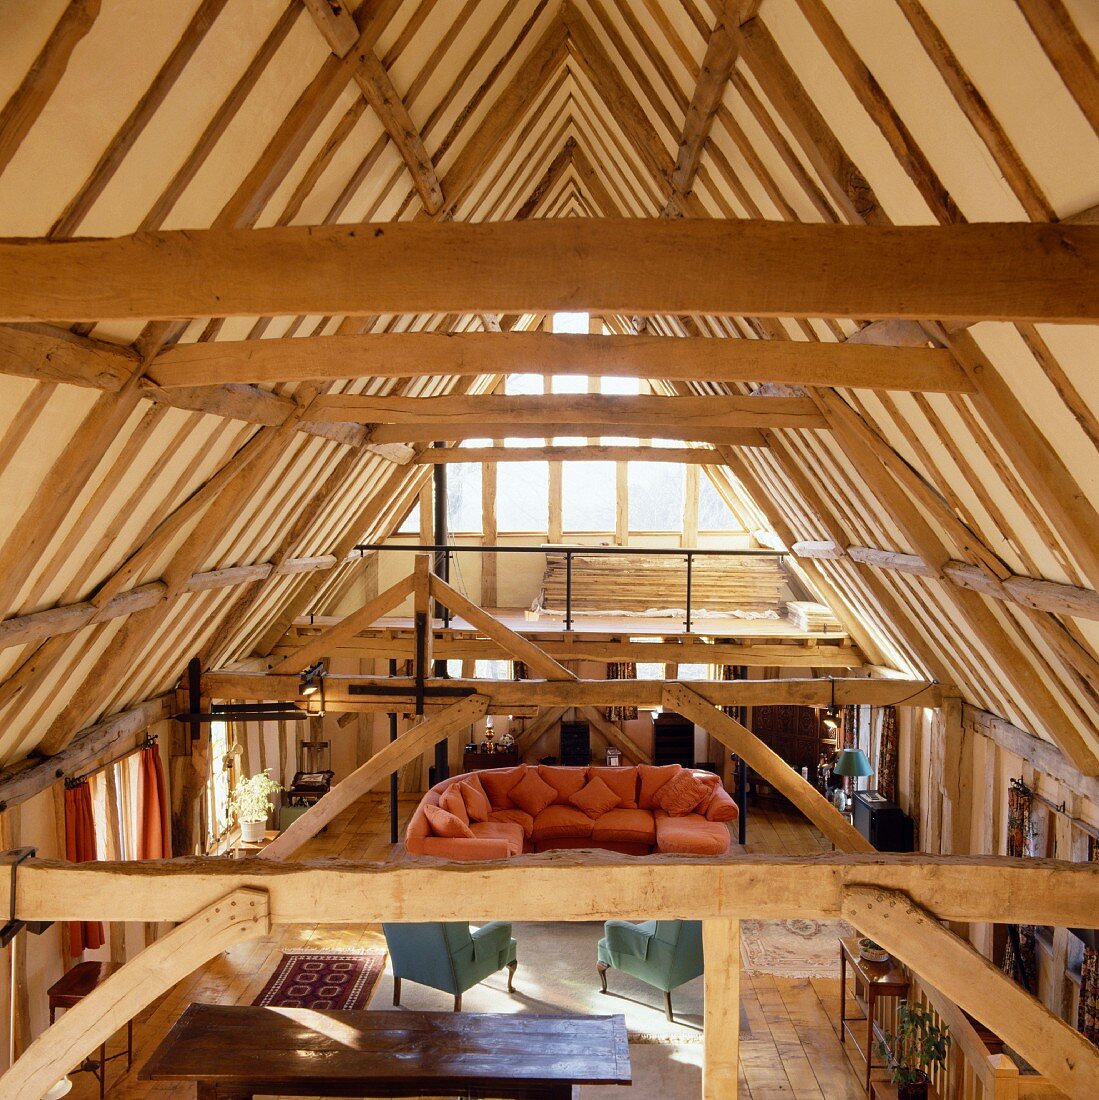 Rustic roof timbers and open-plan living space with wooden support structures